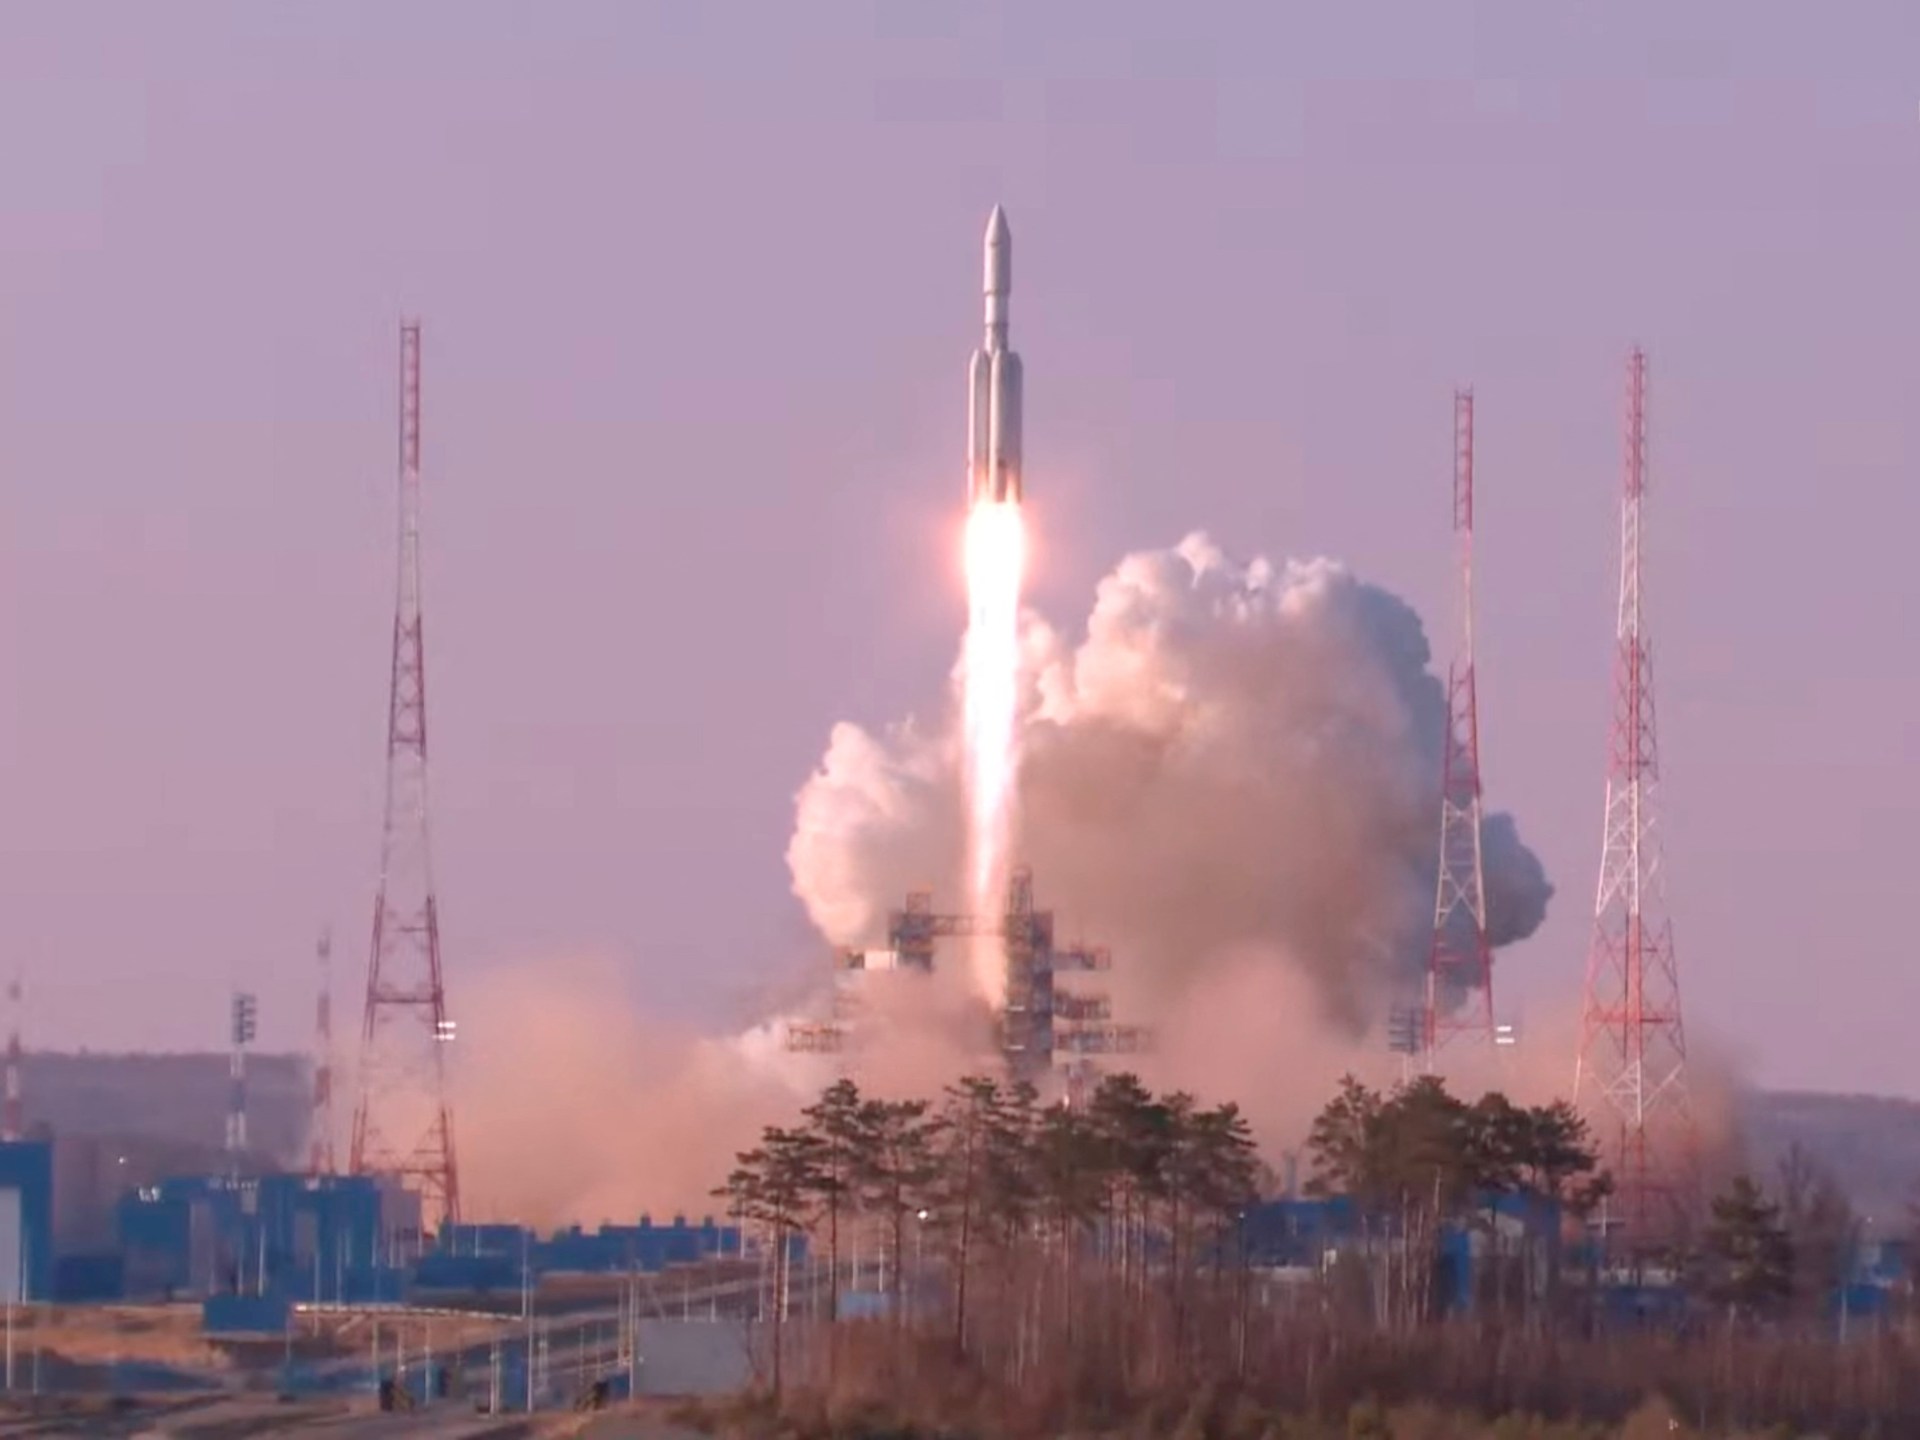 Russia’s Angara A5 rocket blasts off into space after two aborted launches | Space News